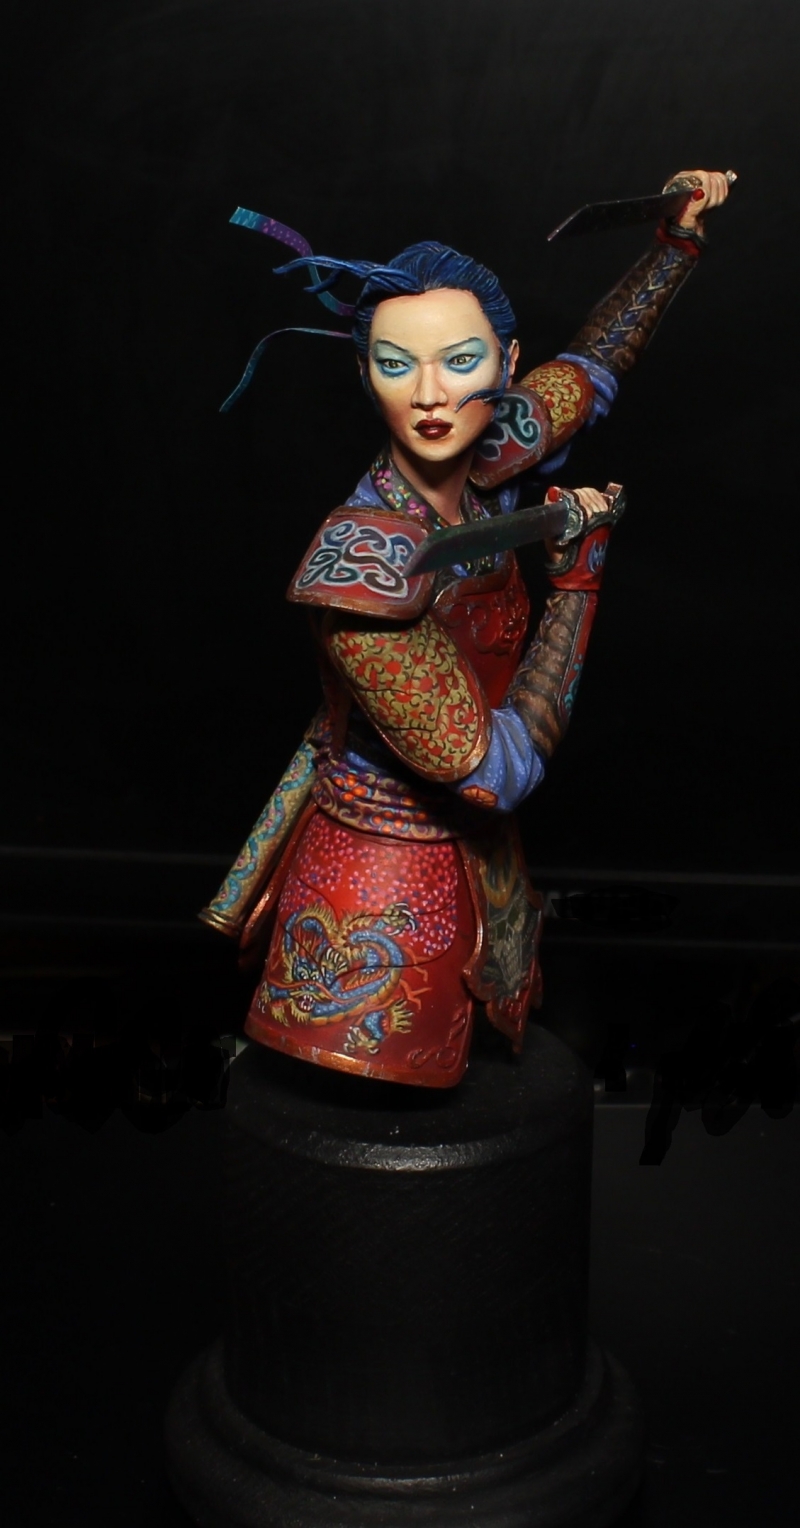 Daughter of the Dragon Bust from Altores Studio